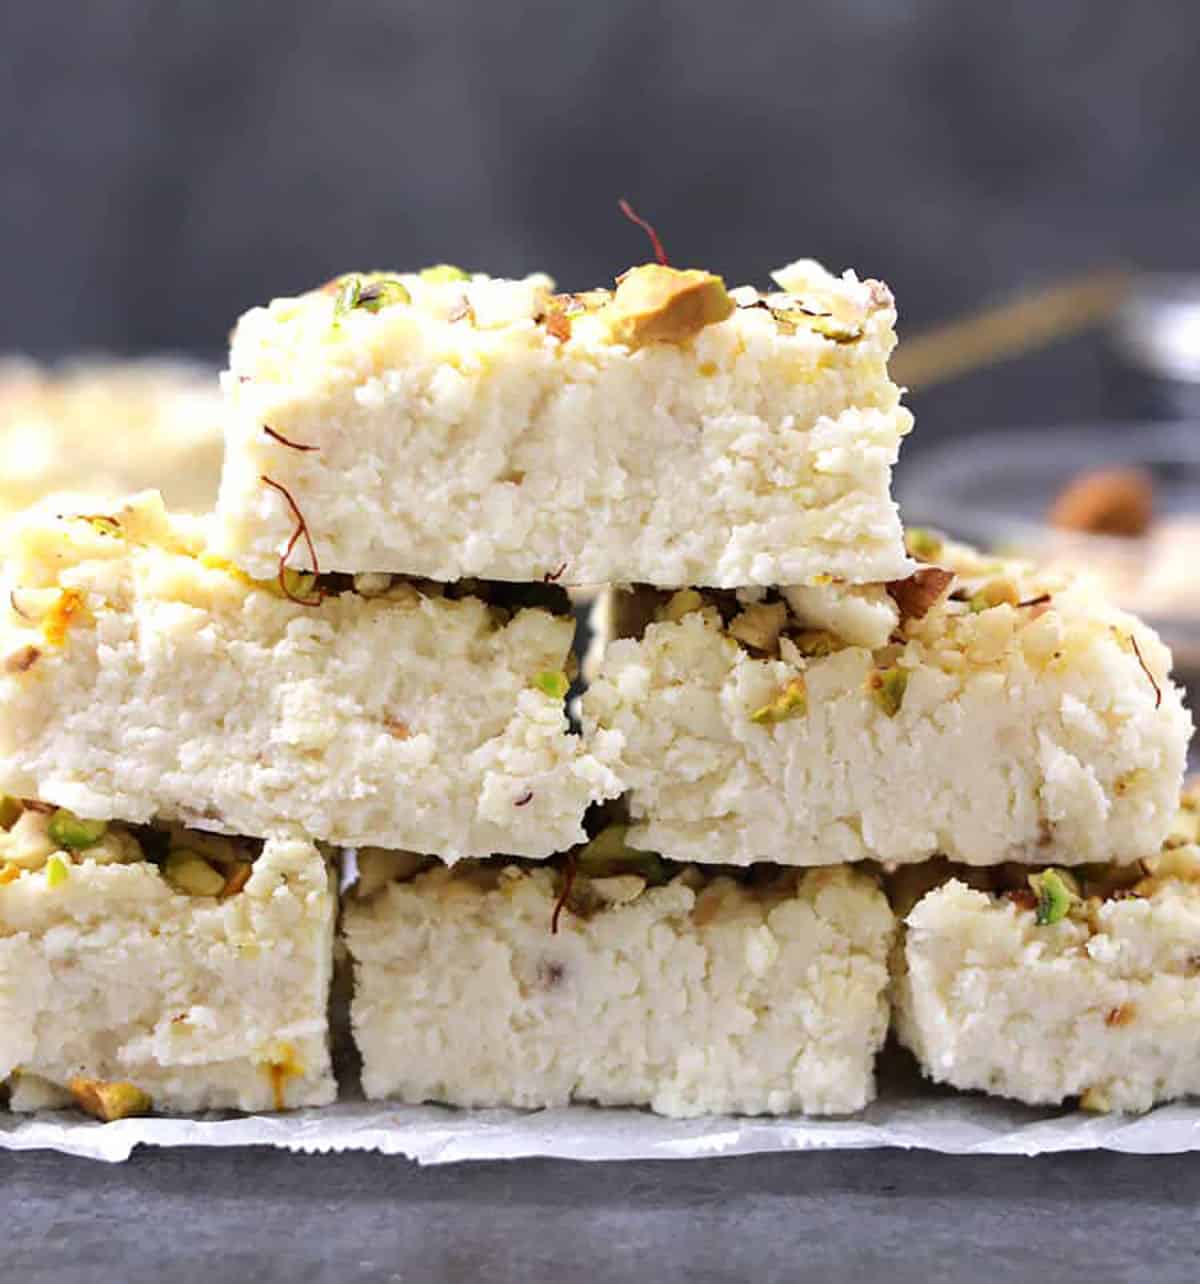 Stack of Indian kalakand mithai (Indian dessert made with paneer or ricotta cheese). 